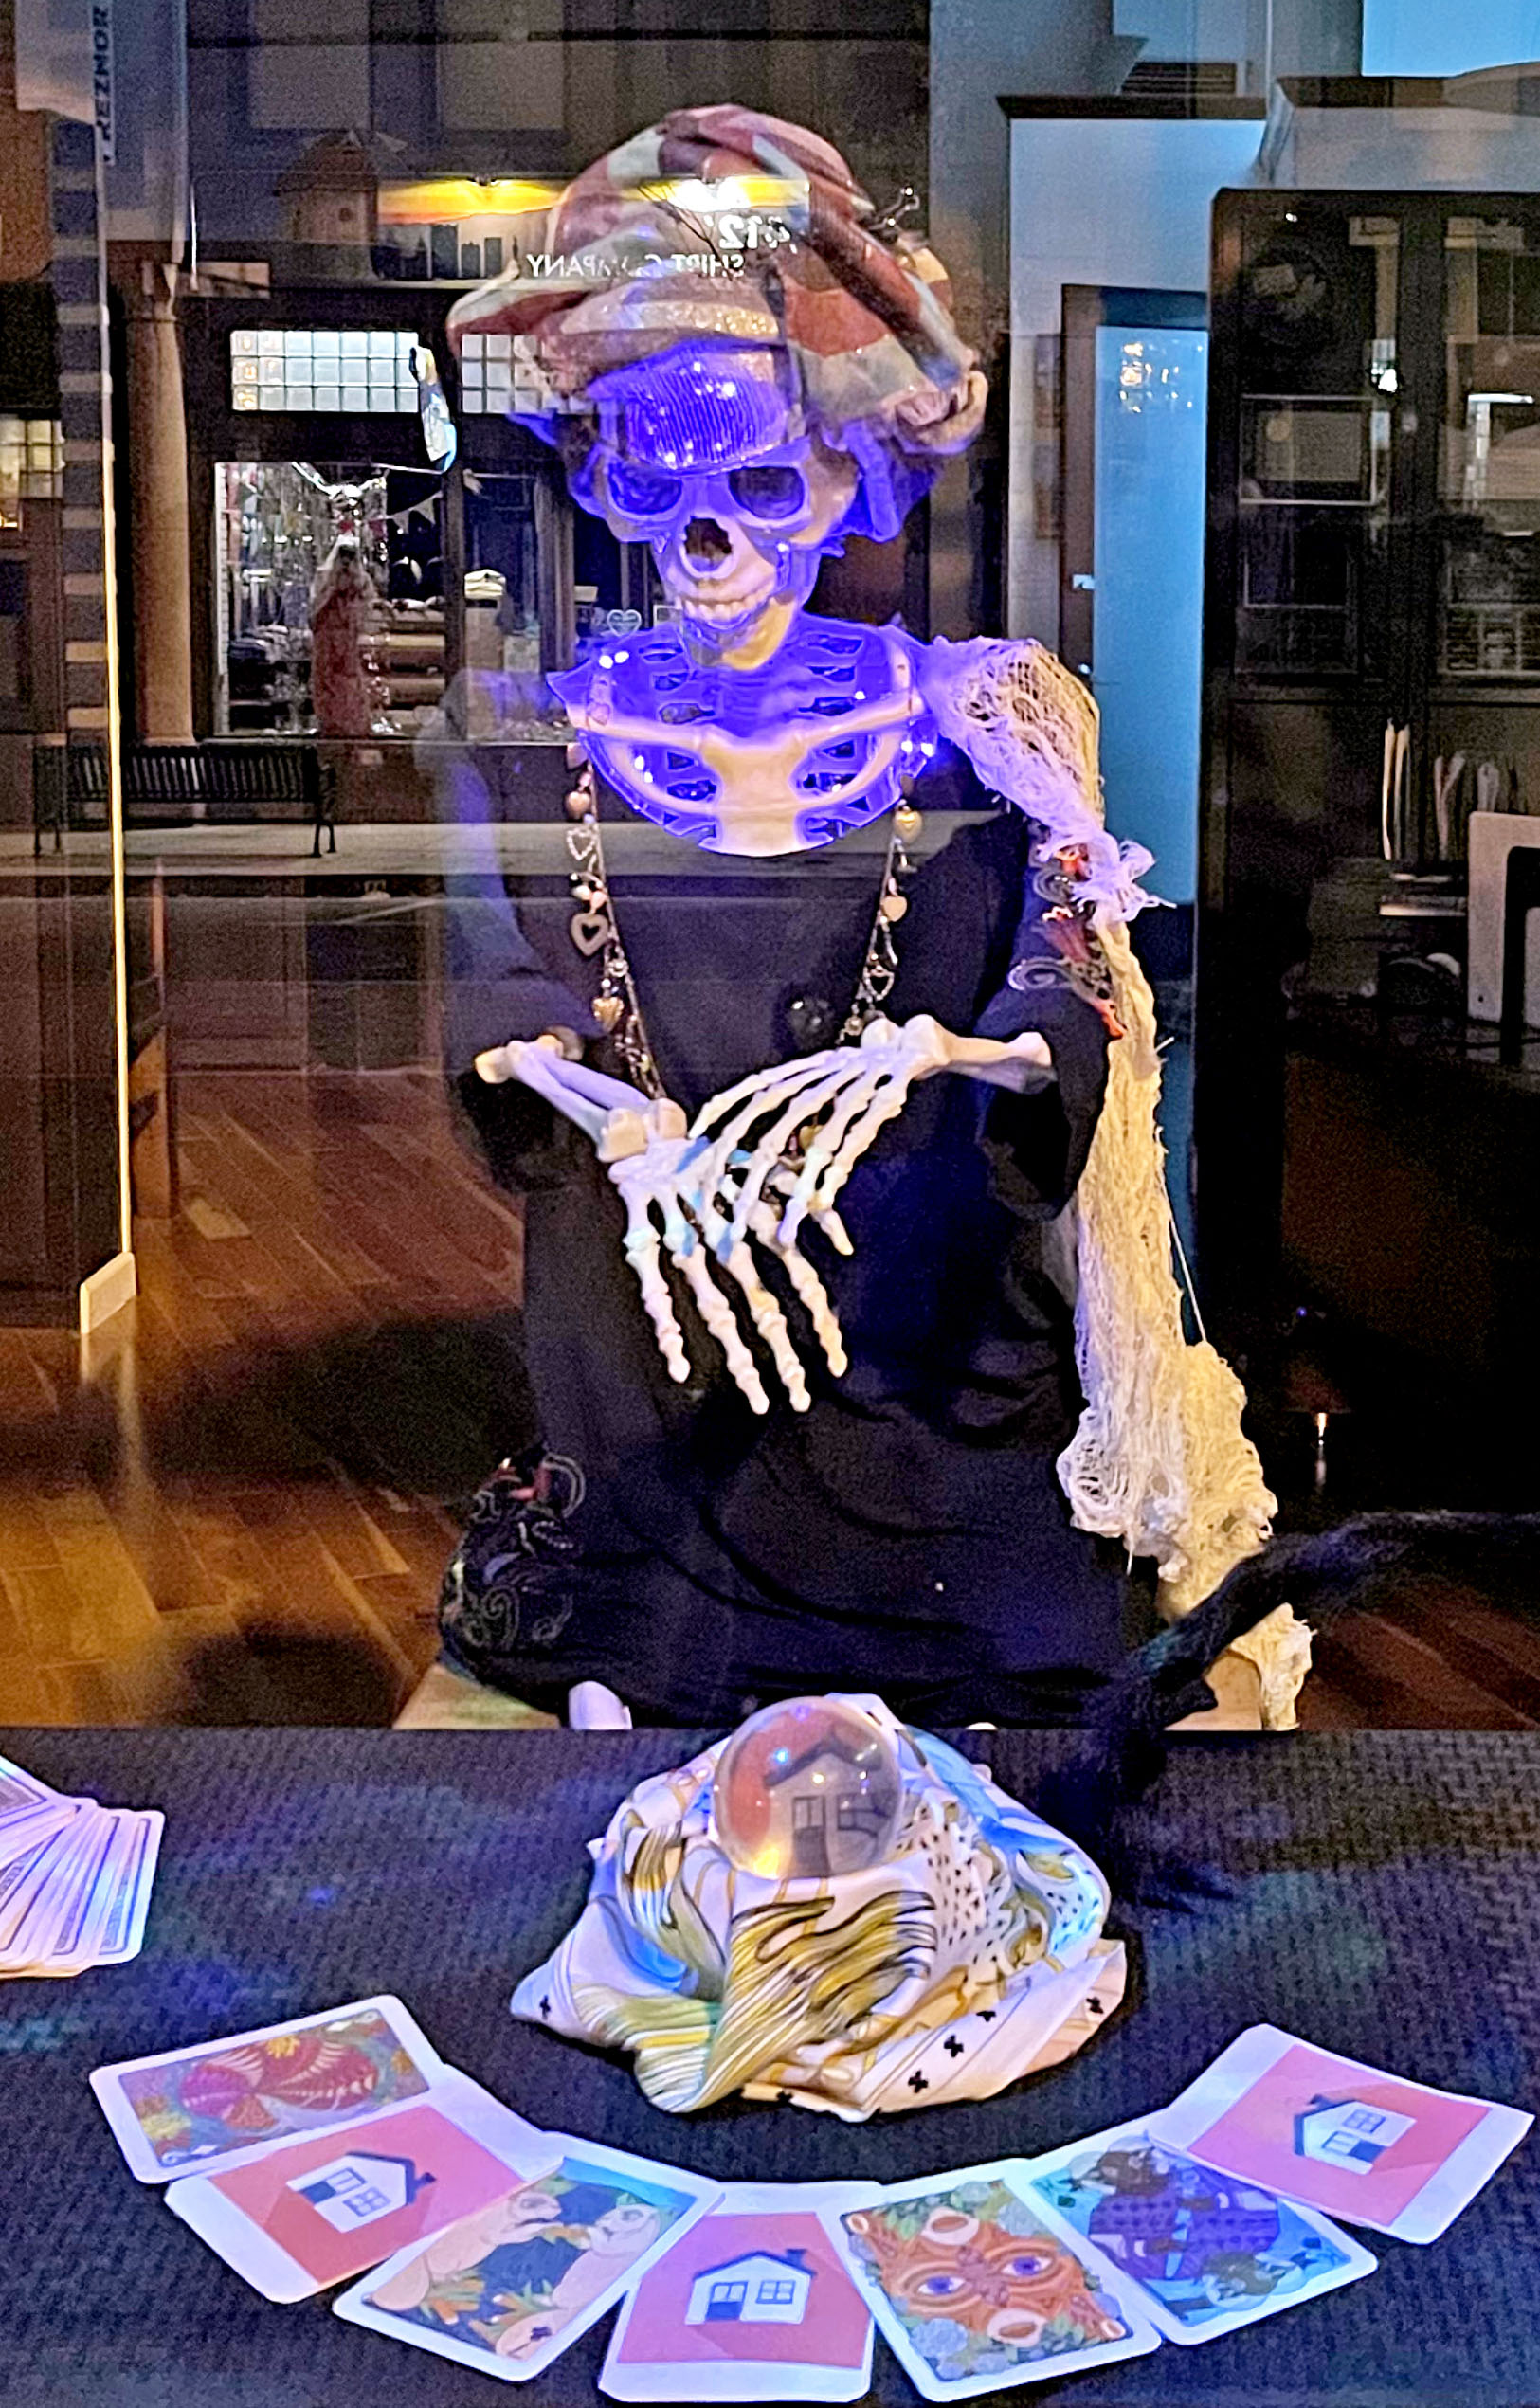 Courtesy images. Manitou Springs Real Estate’s fortuneteller skeleton took second place.